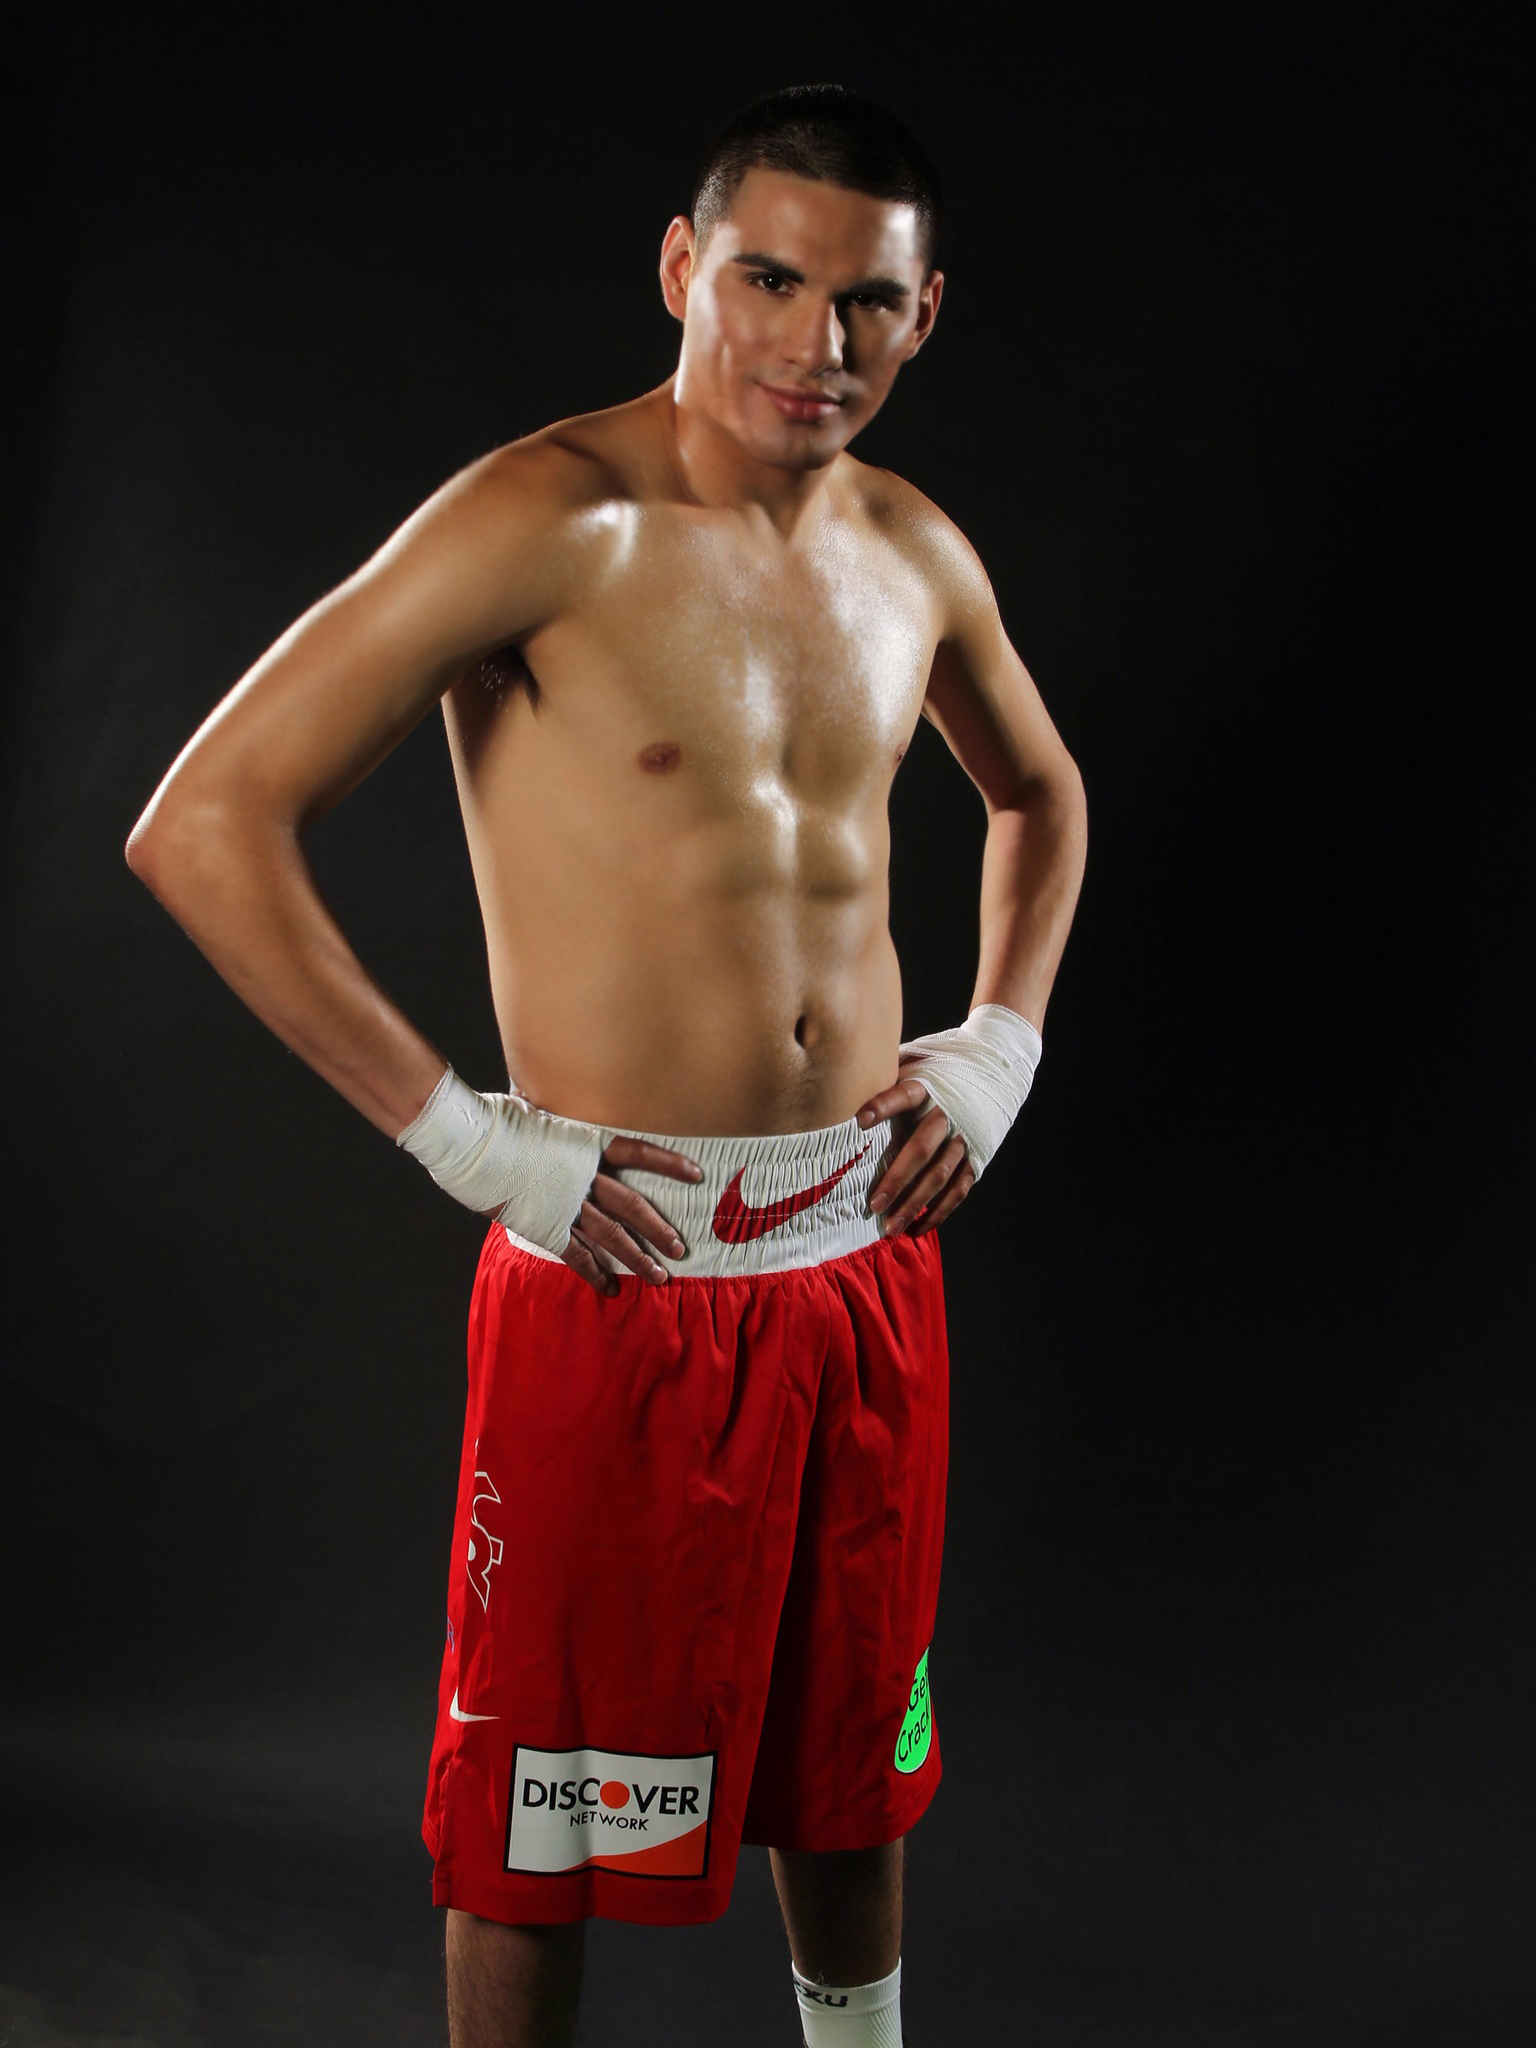 2012 United States Olympian and Undefeated Professional